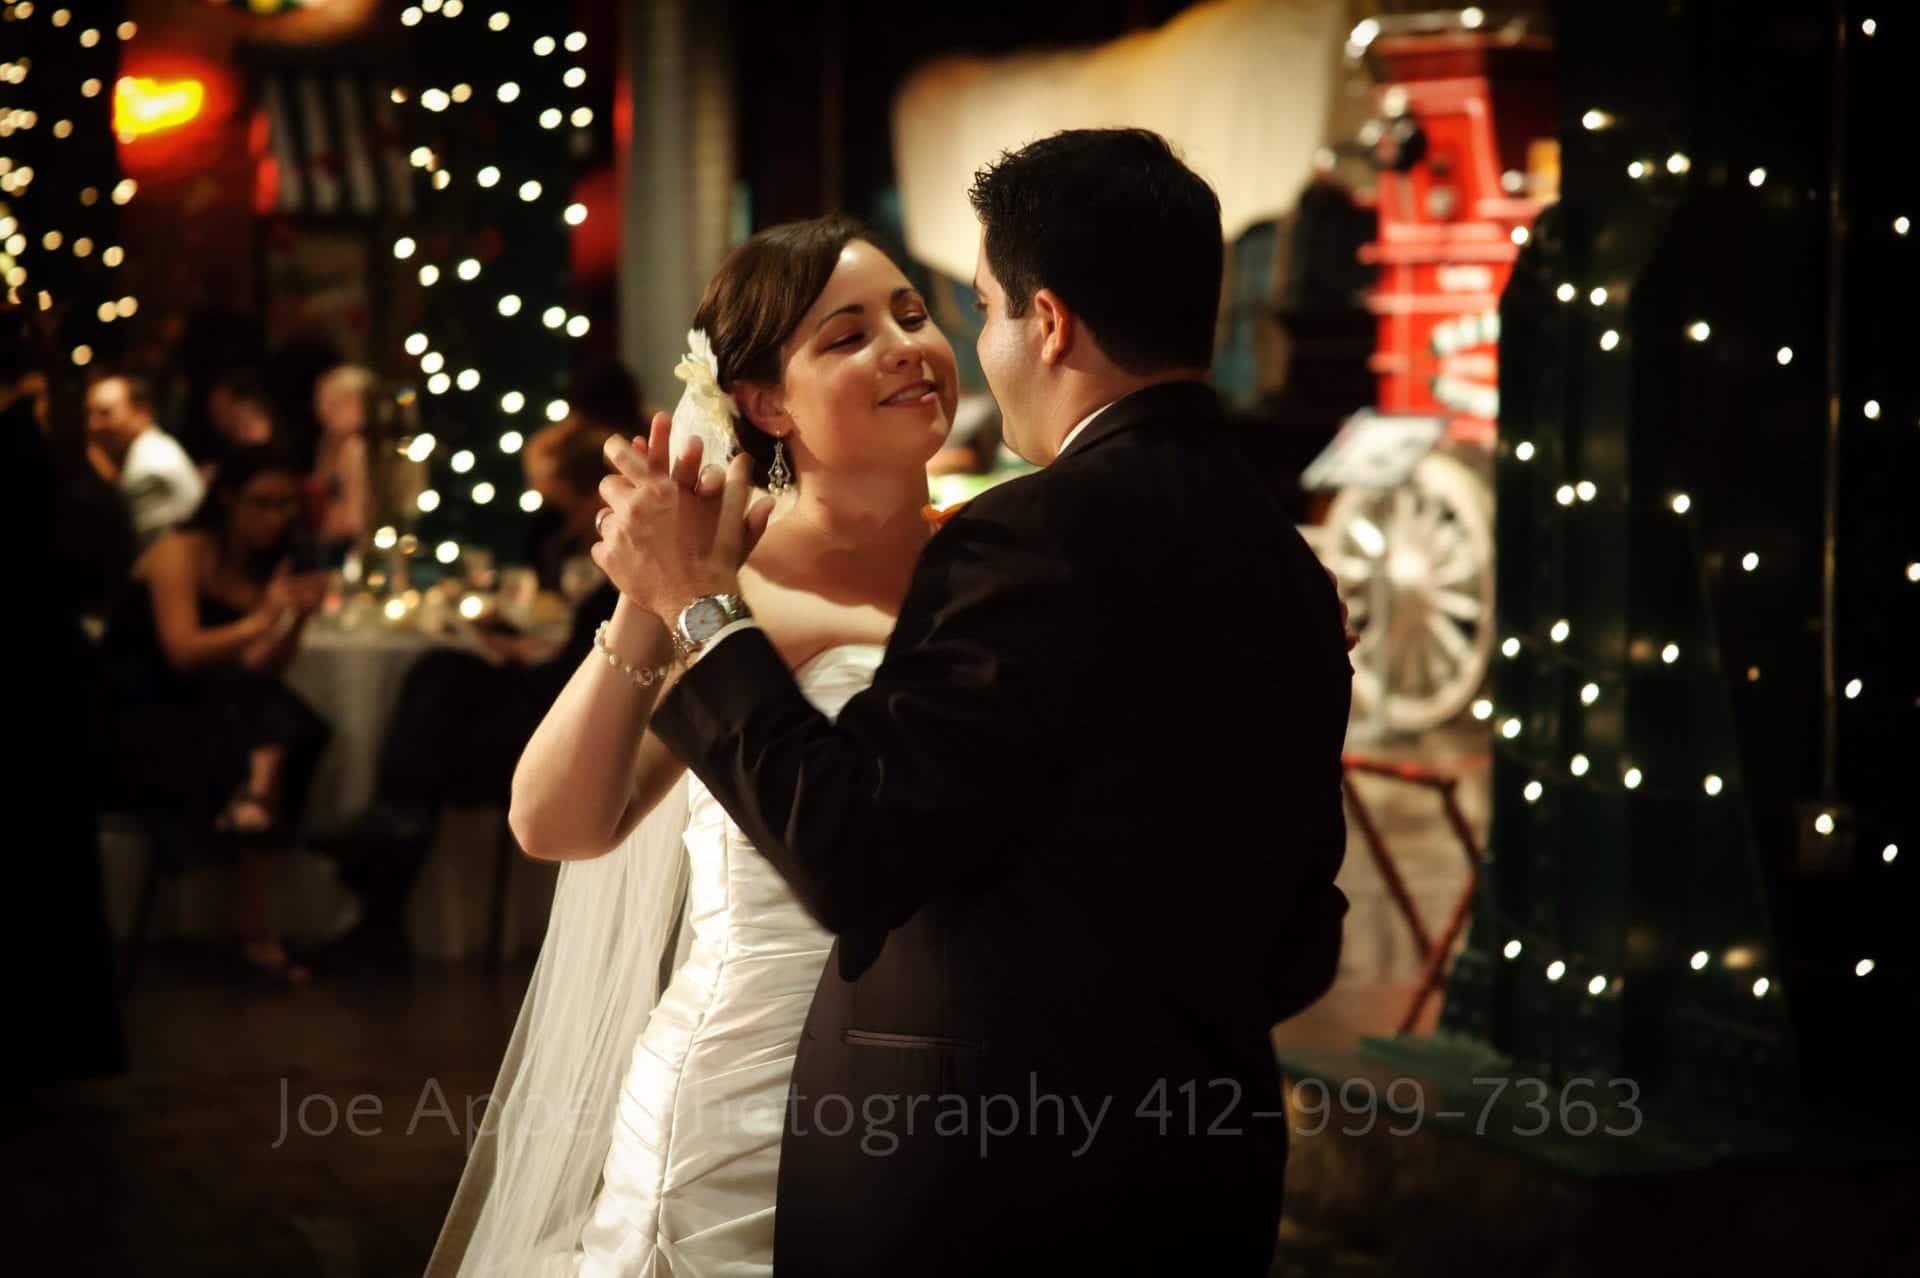 A couple dances at the Great Hall at the Heinz History Center with twinkle lights wrapped around the beams behind them.